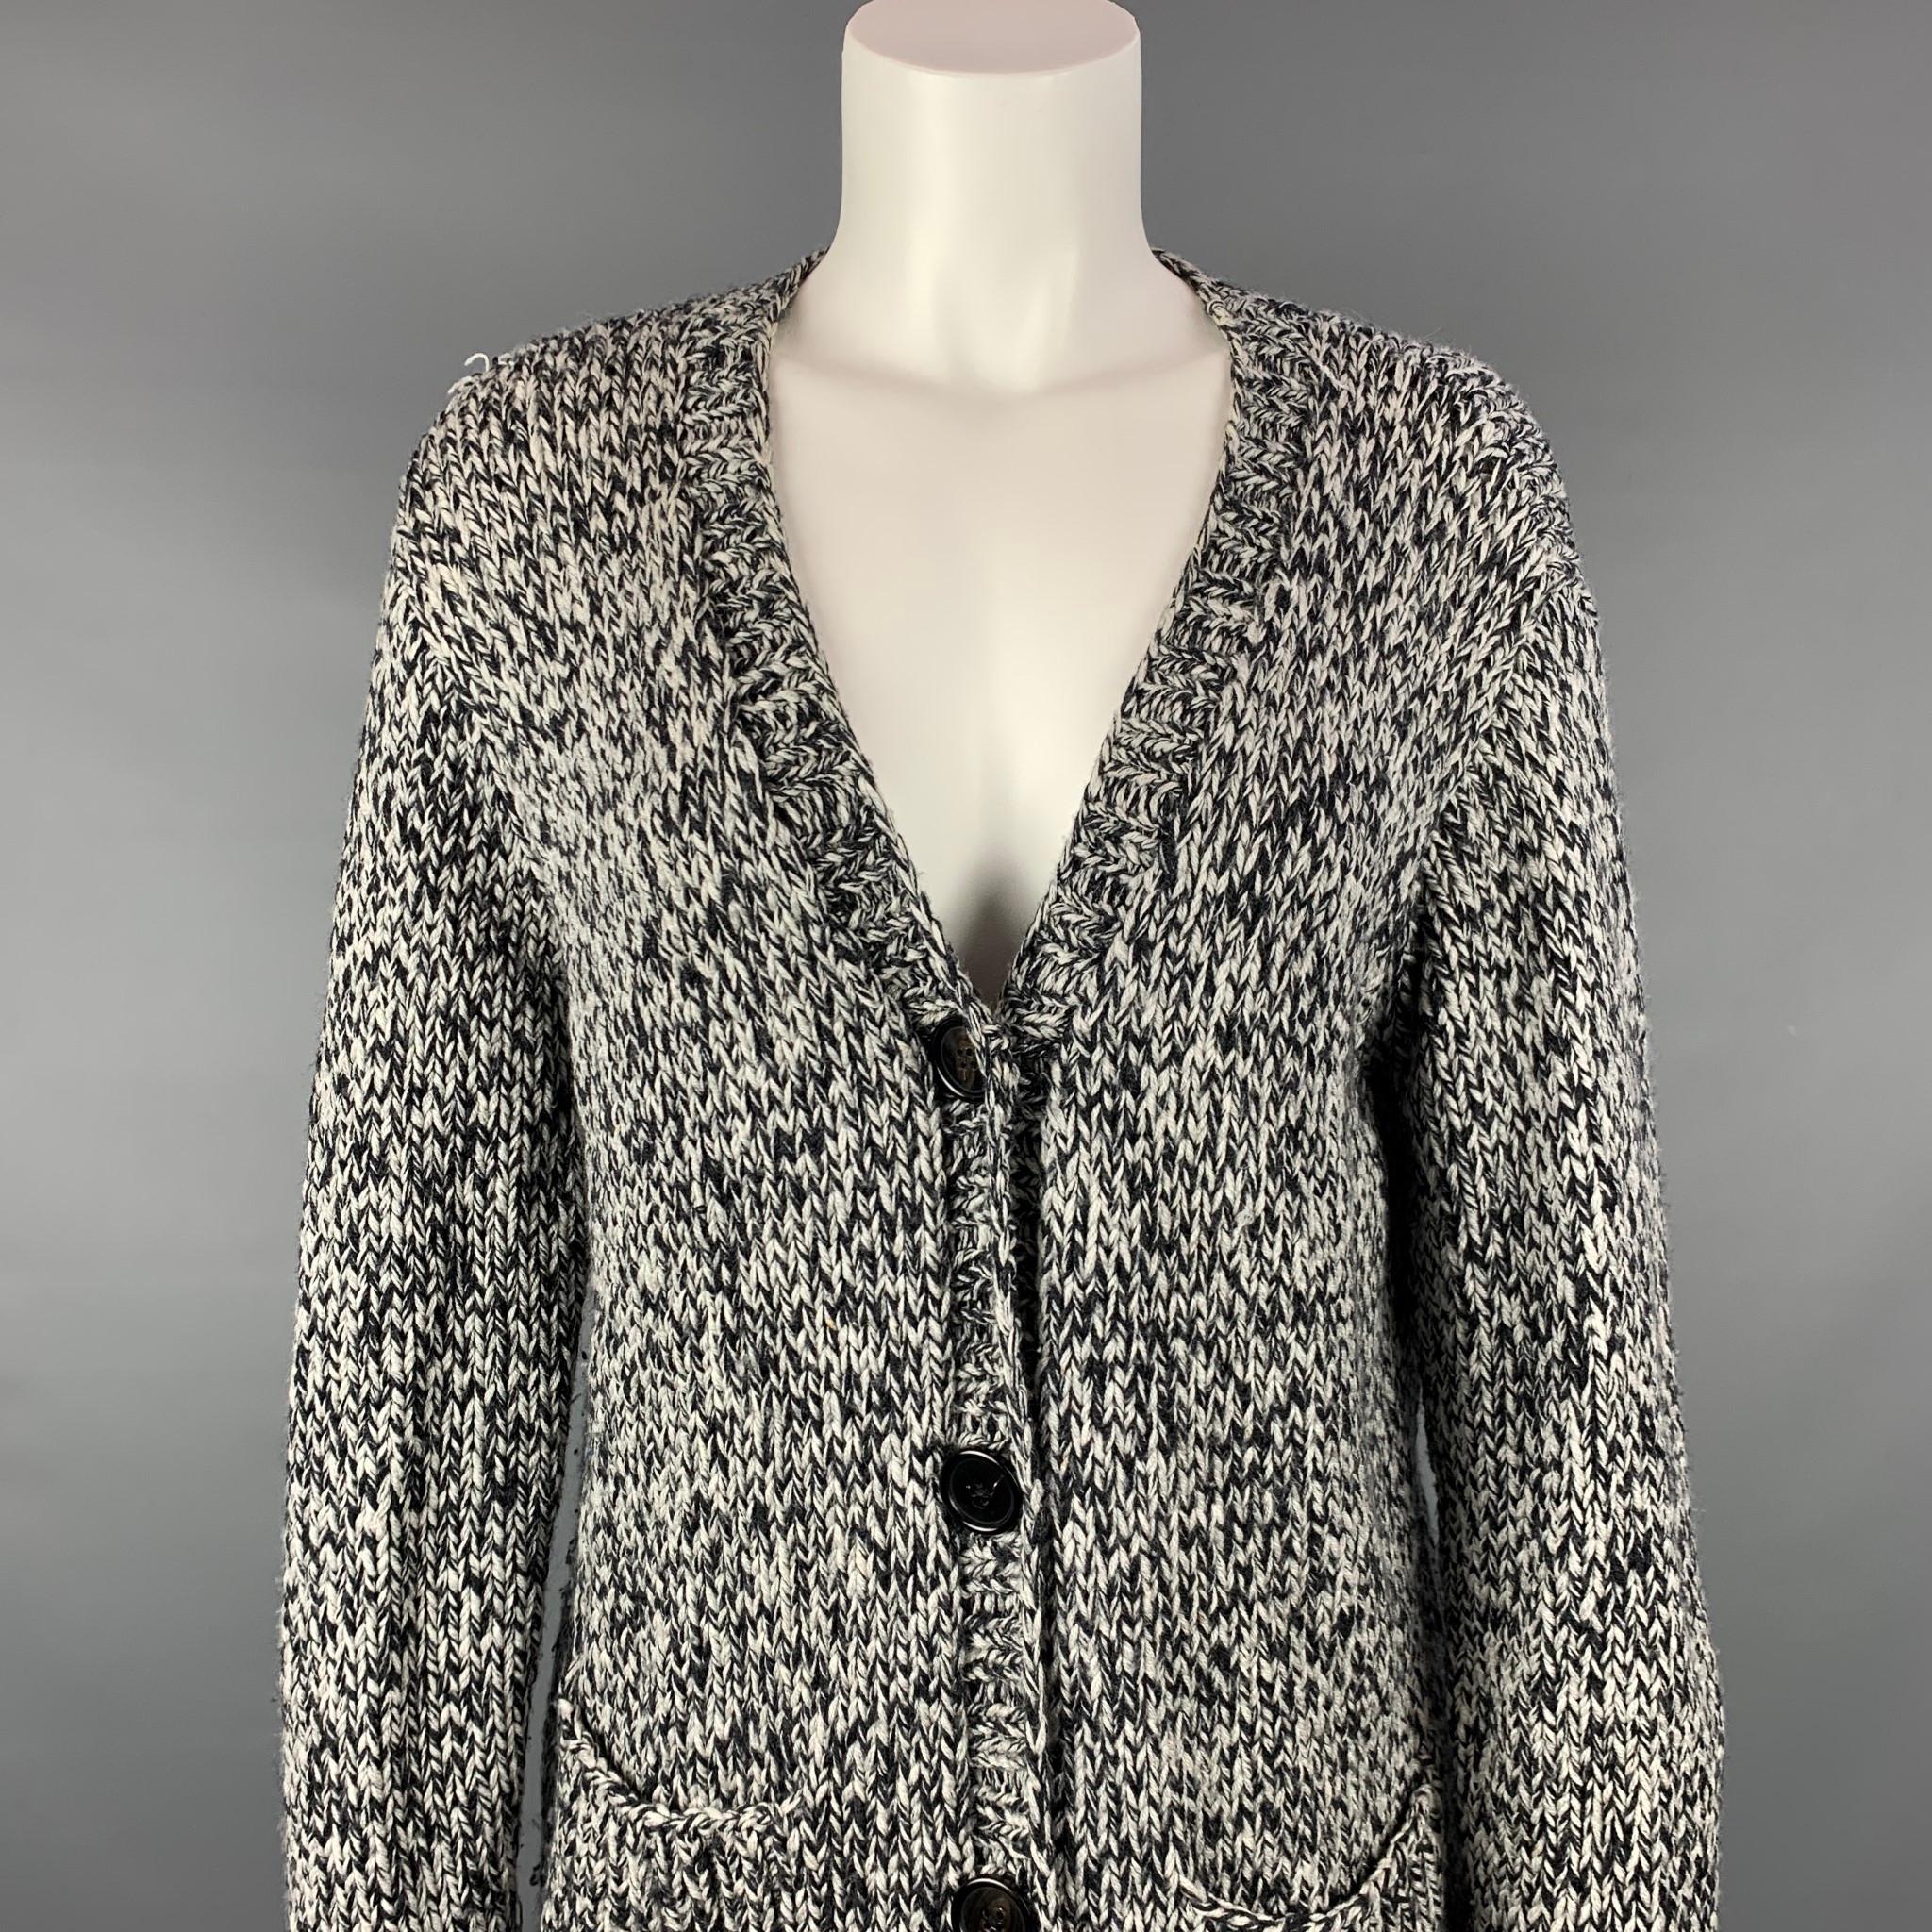 L'AGENCE cardigan comes in a navy & grey knitted merino wool featuring a oversized sit, patch pockets, and a buttoned closure. 

Very Good Pre-Owned Condition.
Marked: 1
Original Retail Price: $620.00

Measurements:

Shoulder: 18.5 in.
Bust: 40